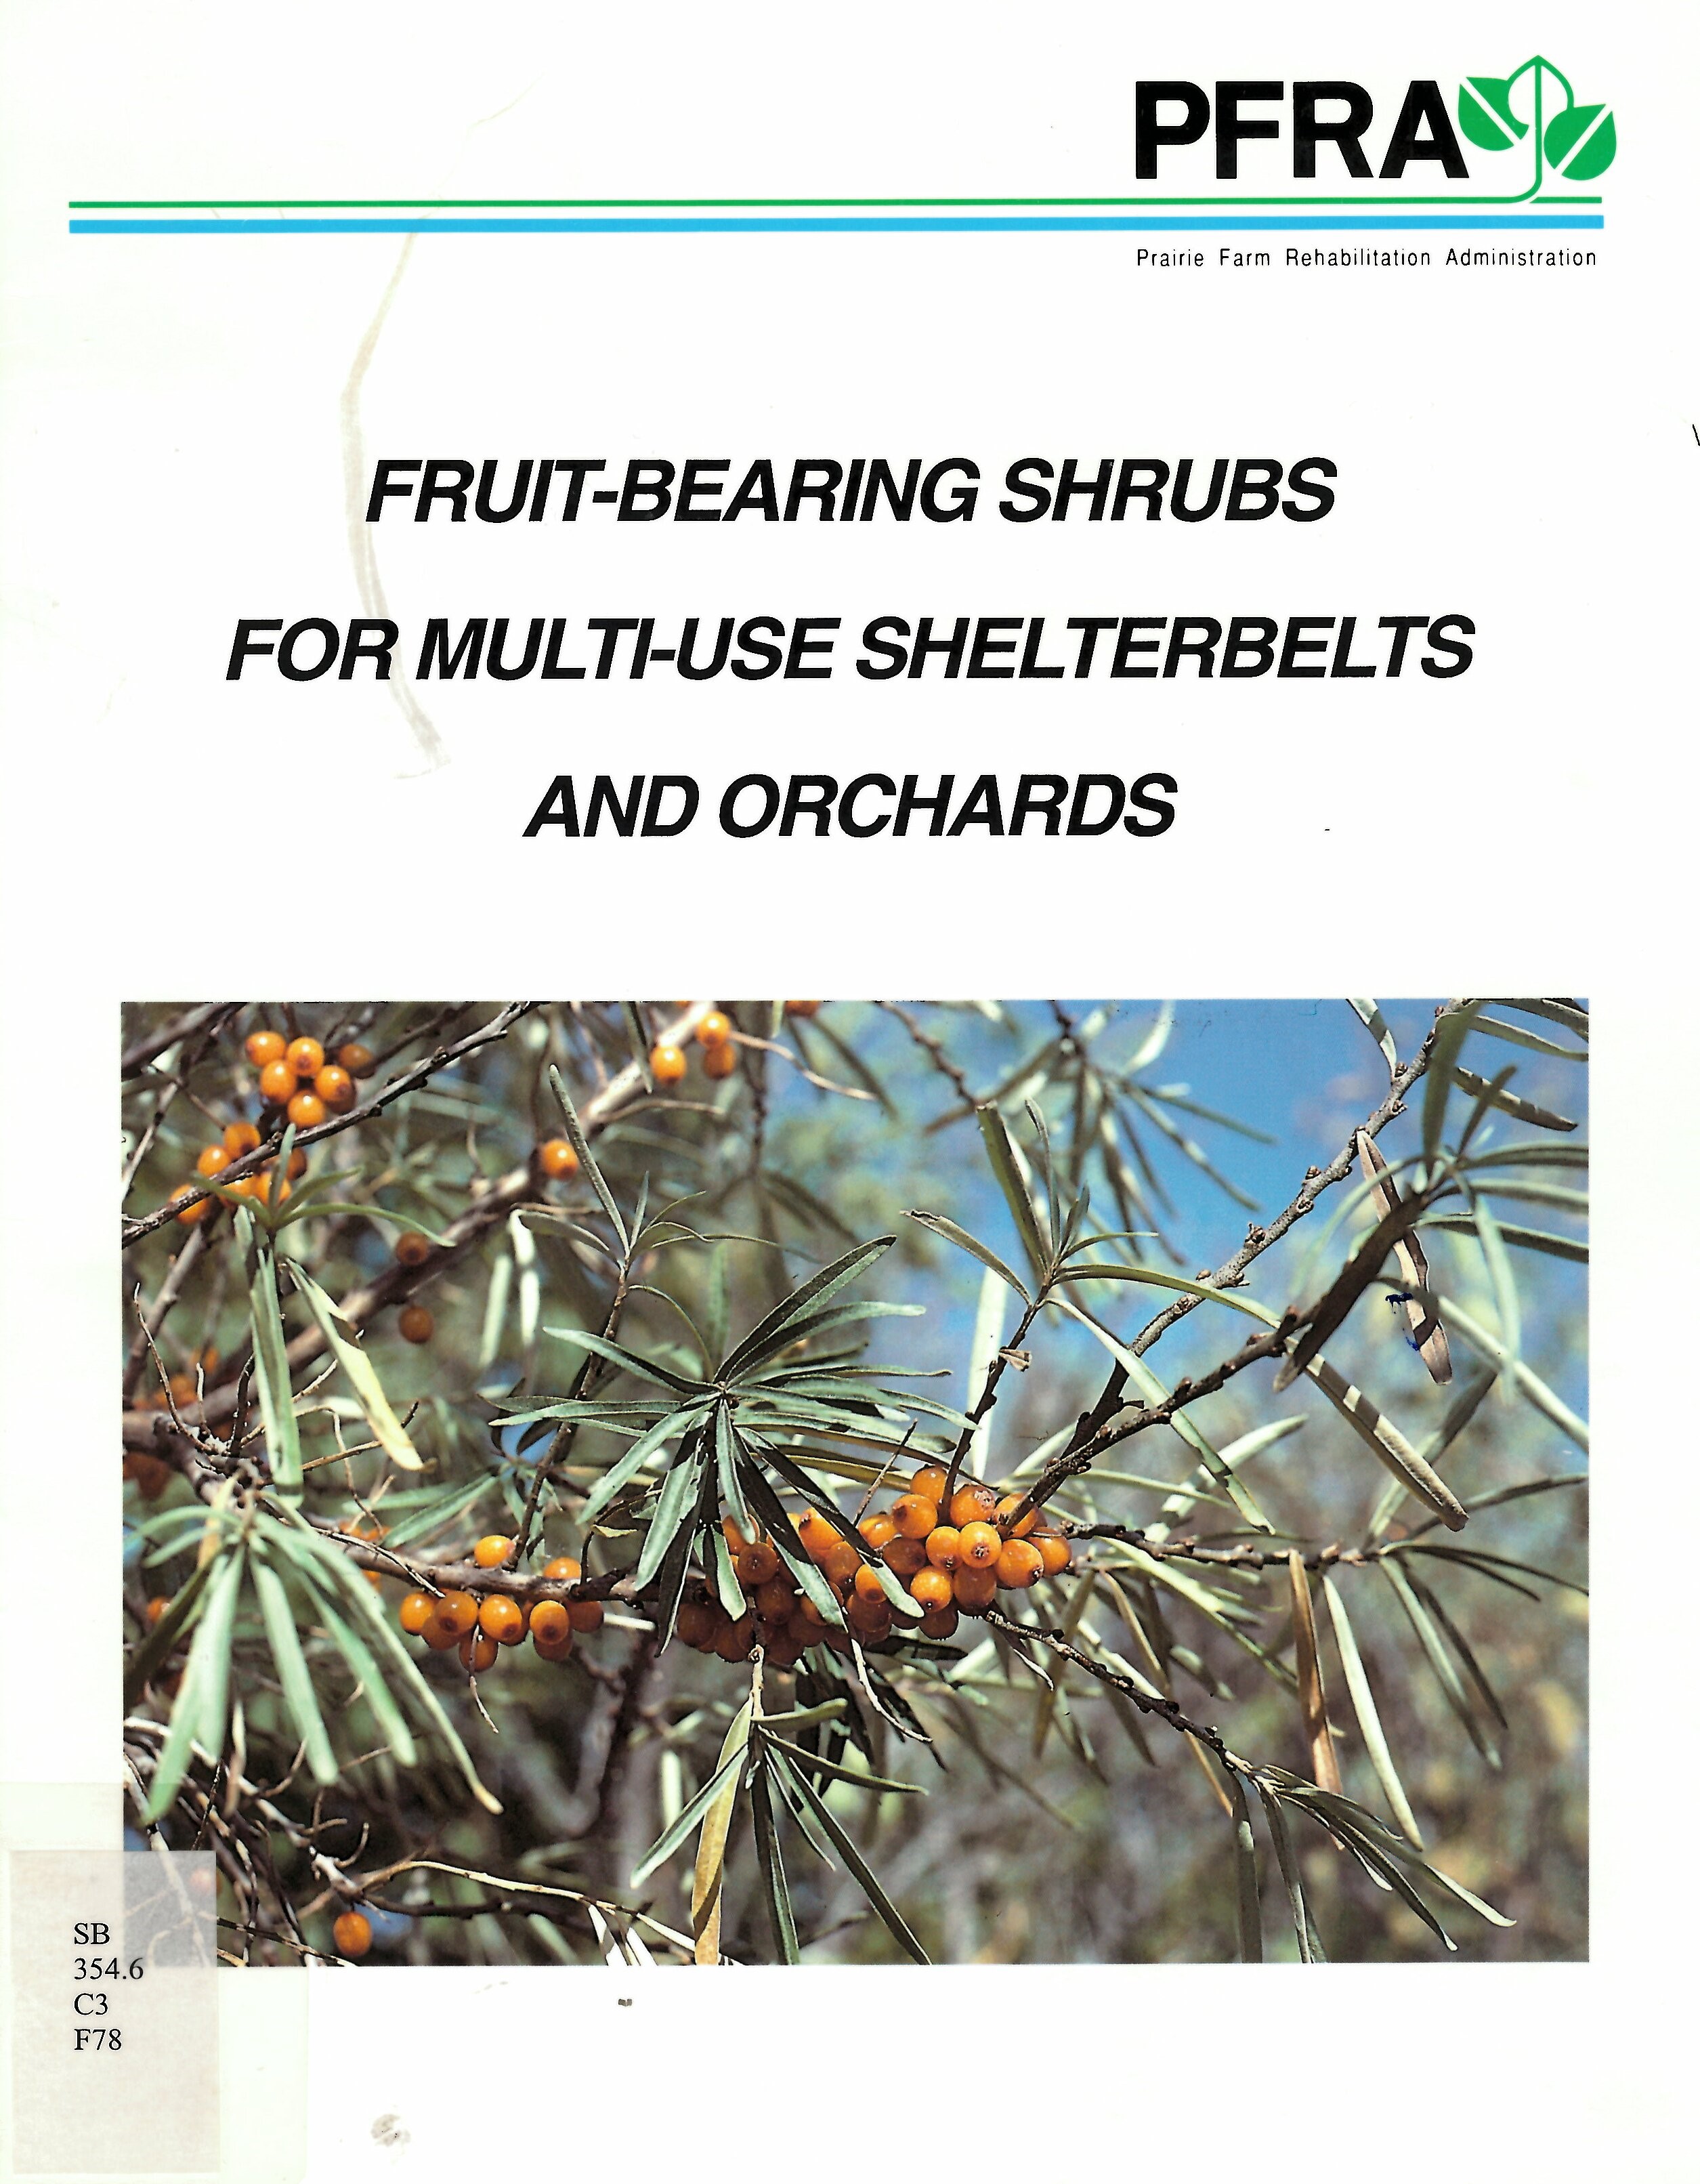 Fruit-bearing shrubs for multi-use shelterbelts and orchards